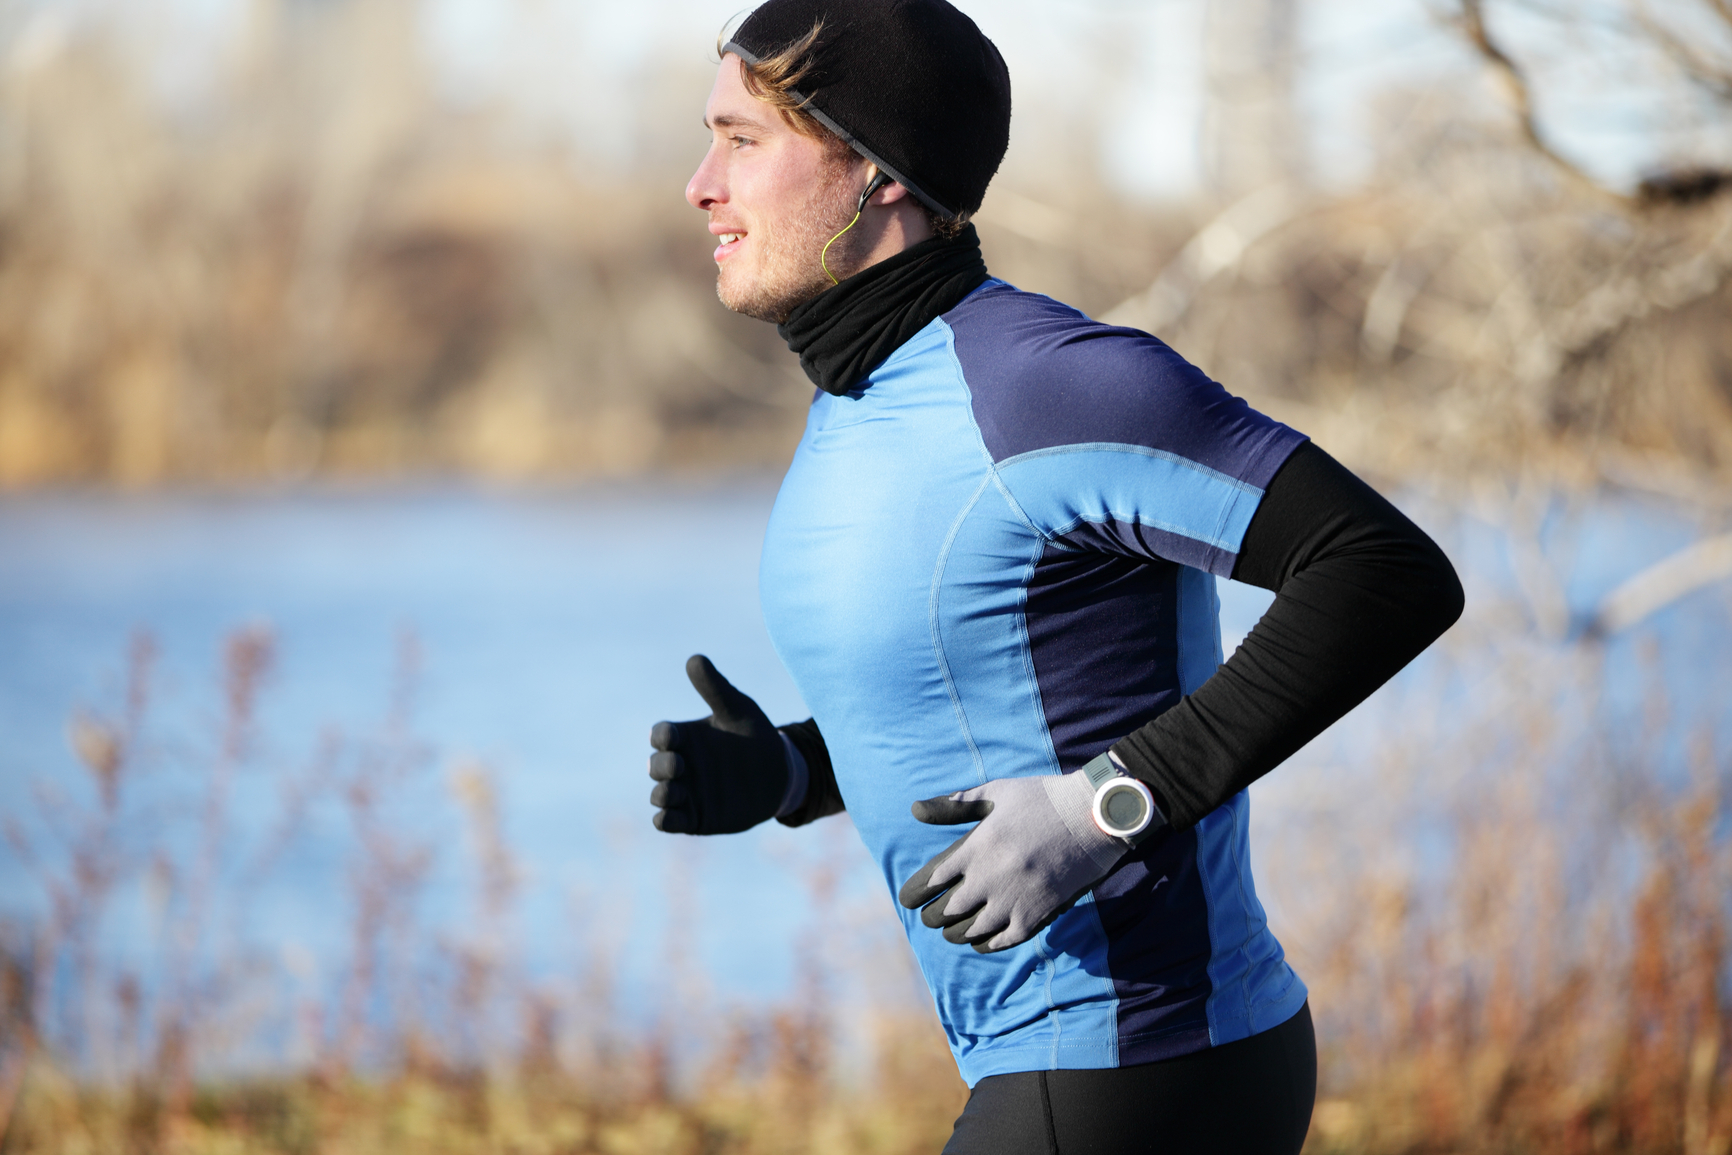 Runner man in fall running in autumn with gloves